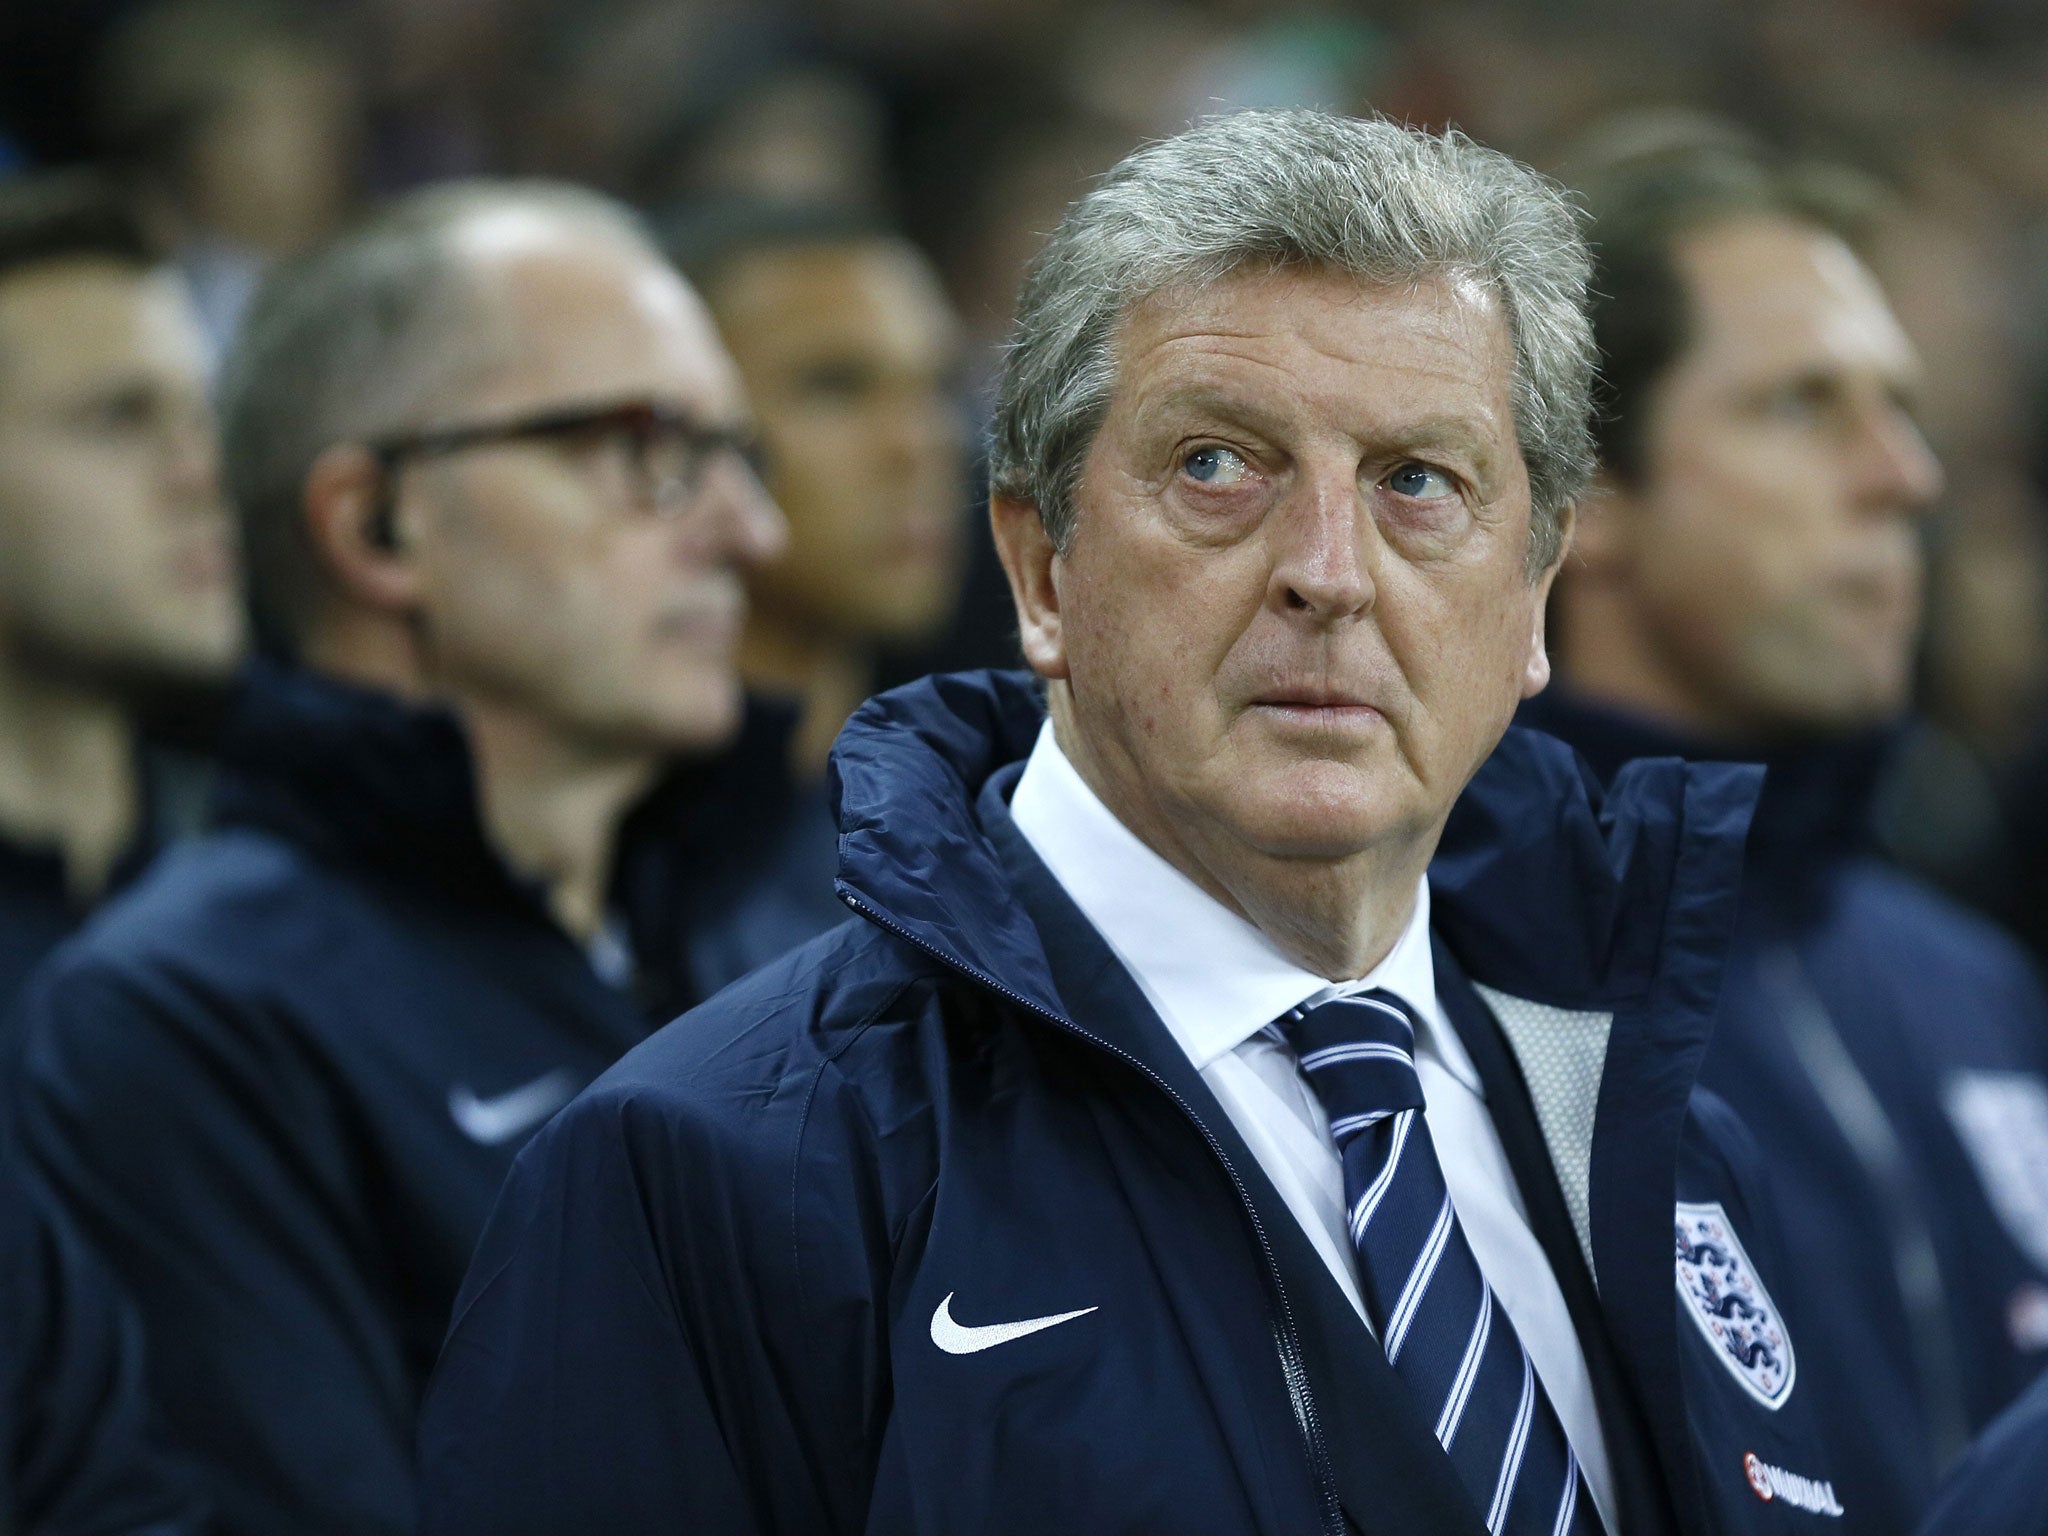 Roy Hodgson is full of admiration for the German team